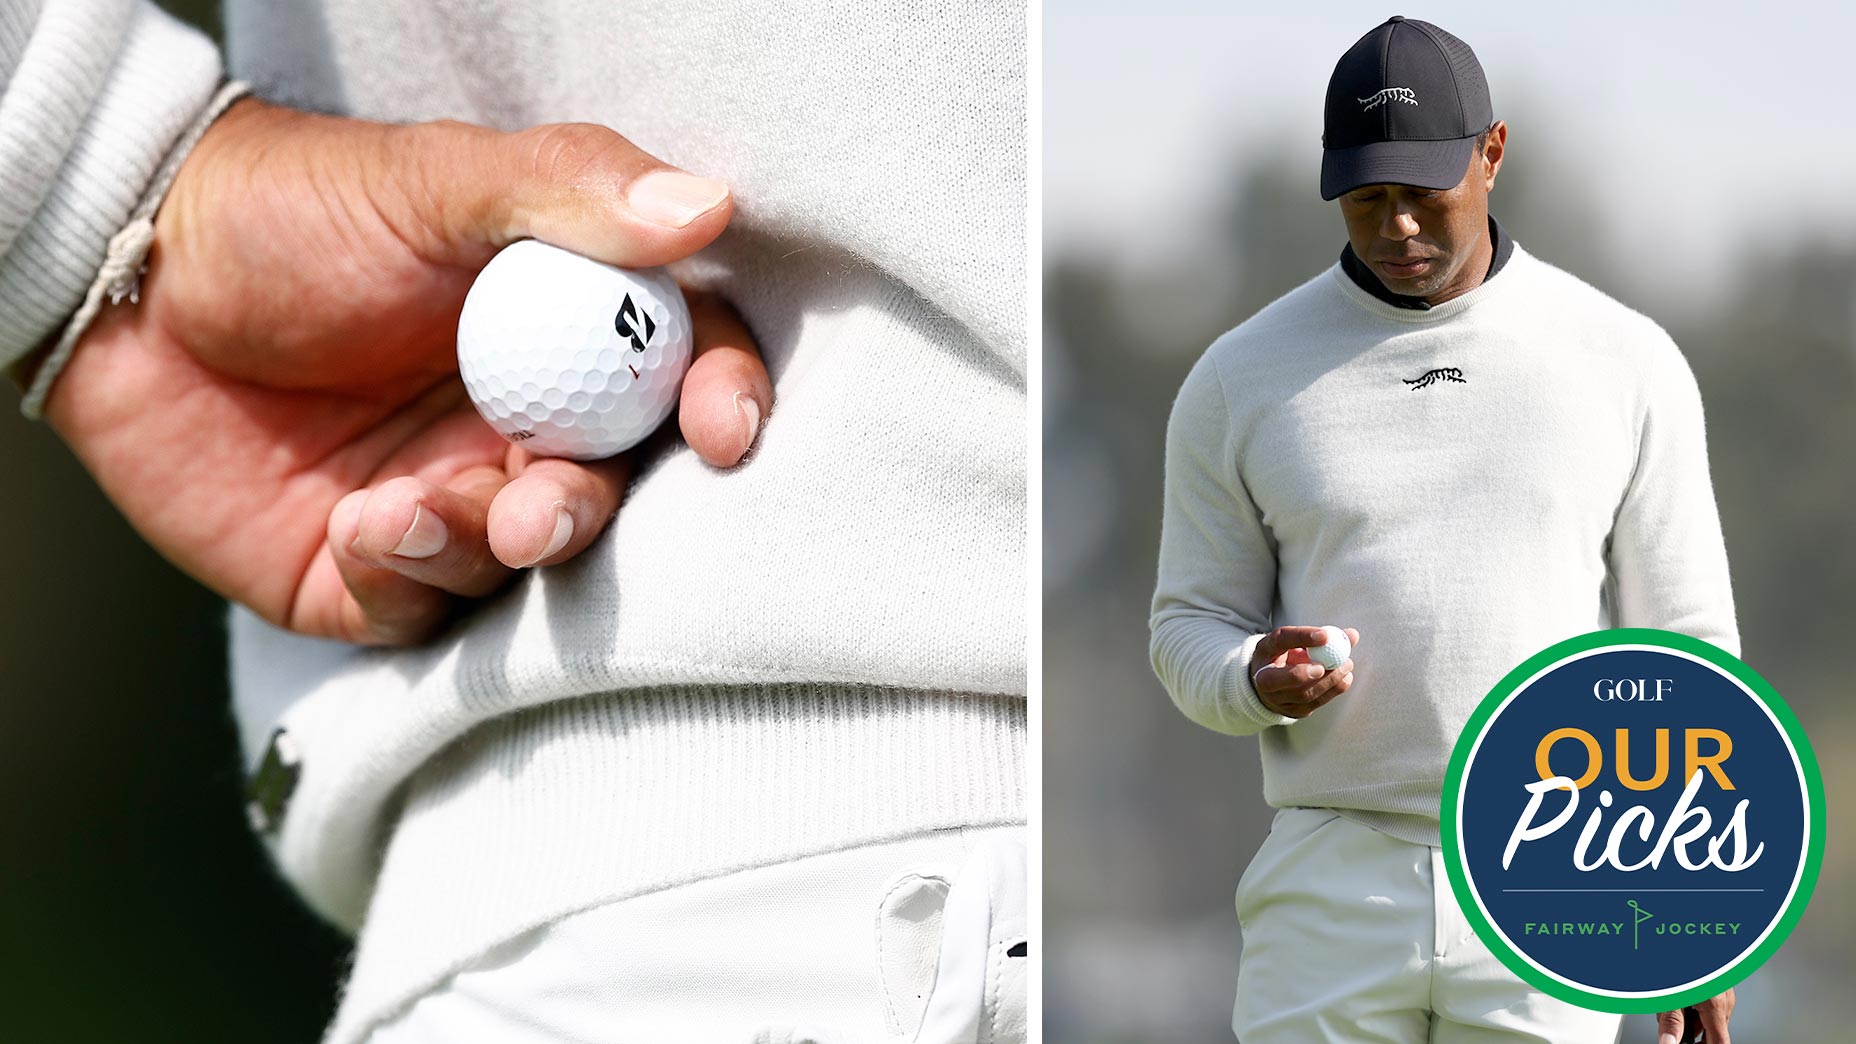 Tiger Woods stepped onto the course at the Genesis Invitational sporting more new gear than only his recent apparel brand. He also has a new ball in hand. - IMAGE CREDITS: (R) Ronald Martinez/Getty Images, (L) Michael Owens/Getty Images